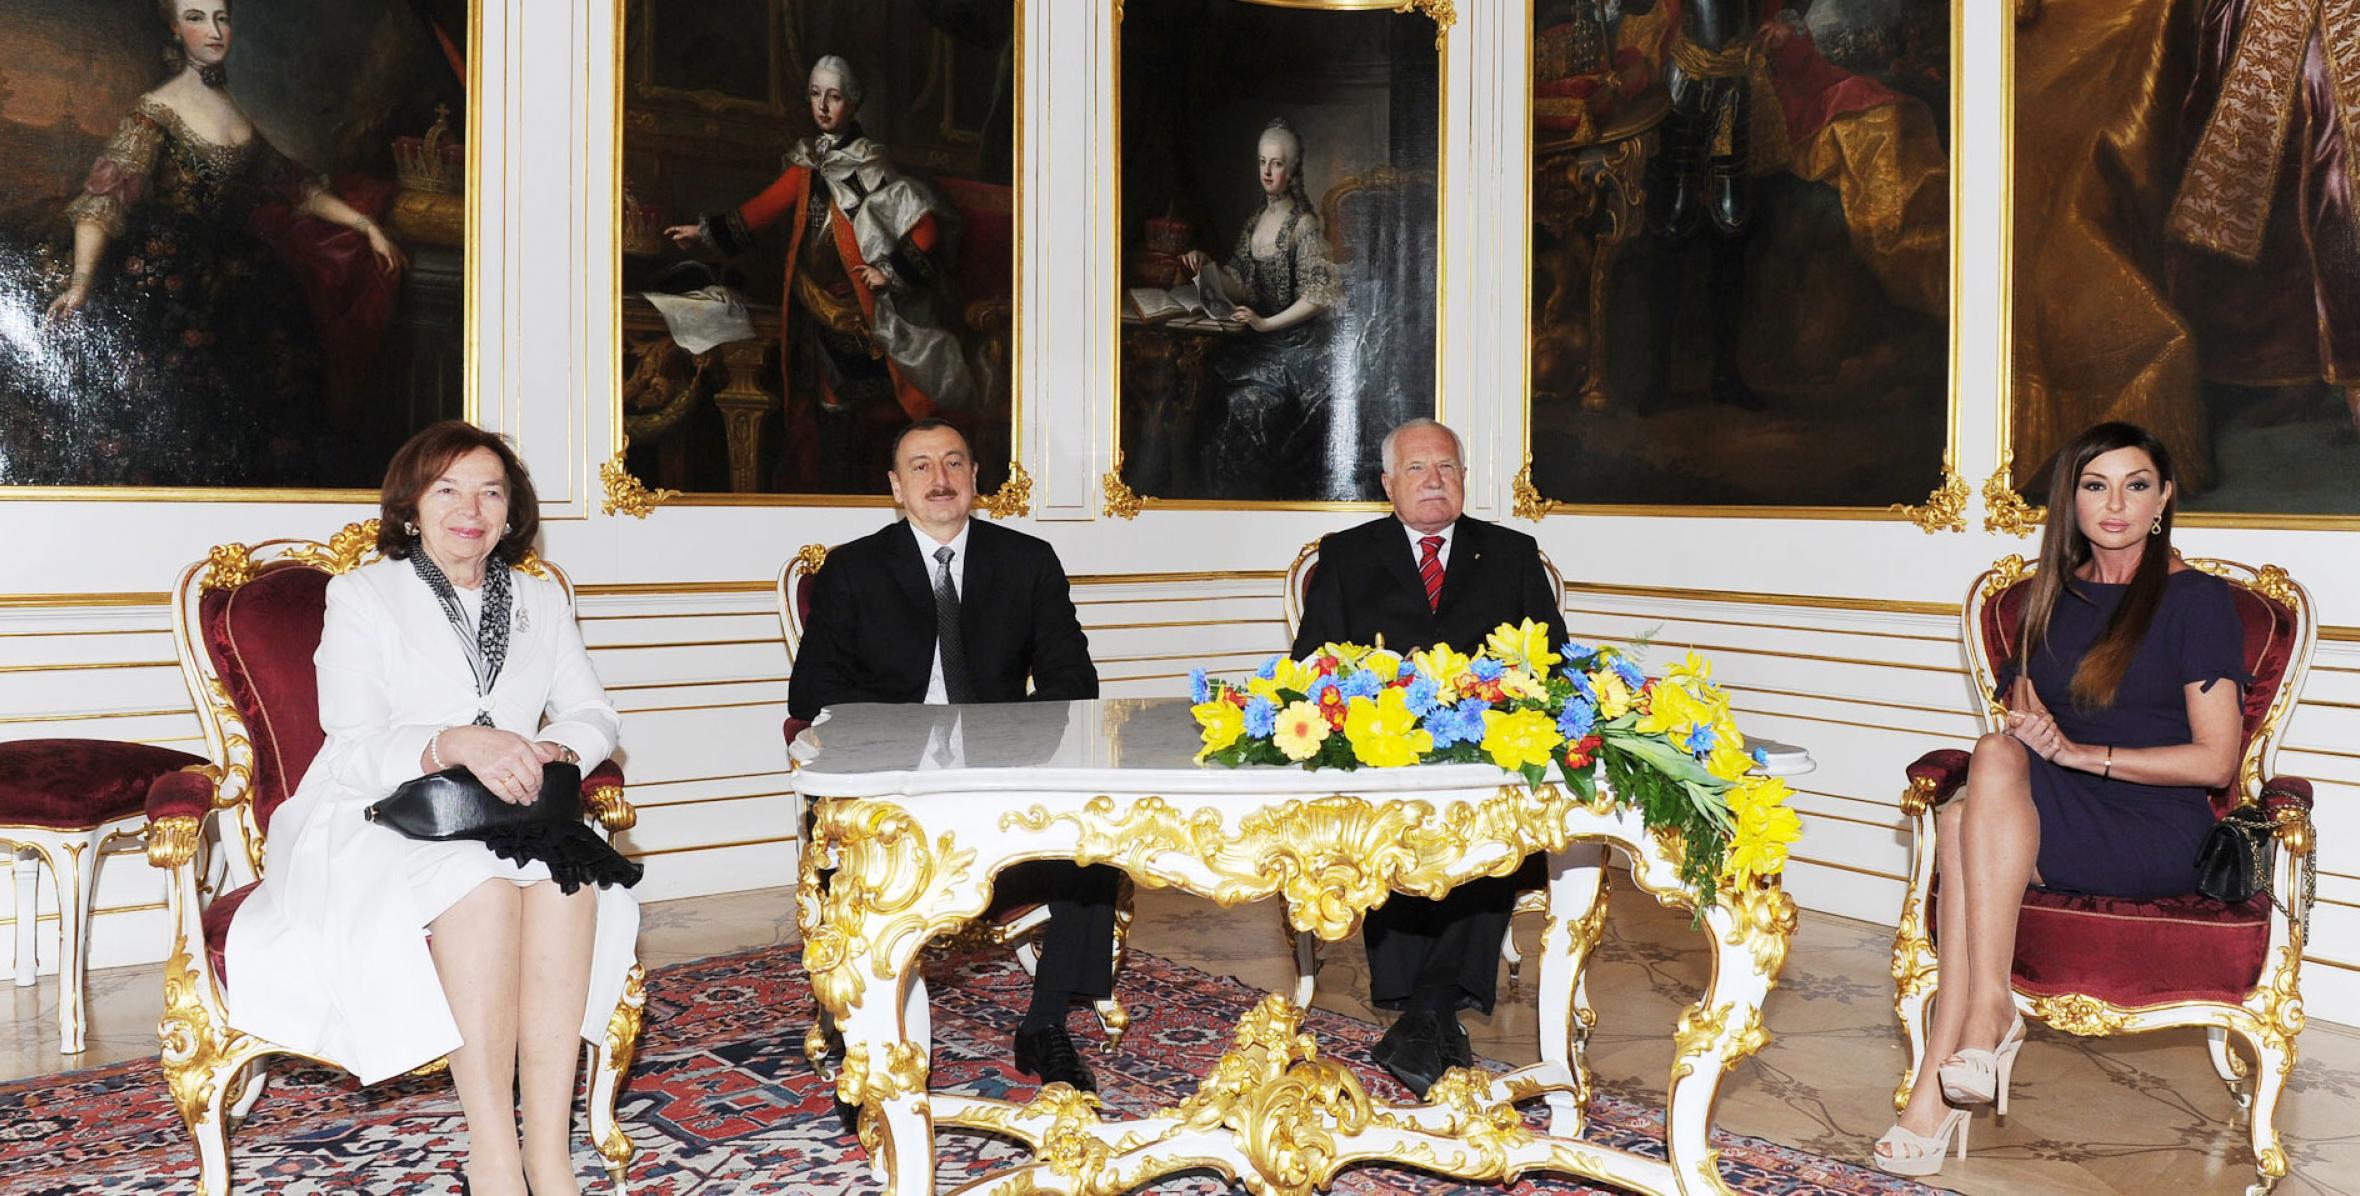 Ilham Aliyev and President of the Czech Republic Vaclav Klaus had a face-to-face meeting